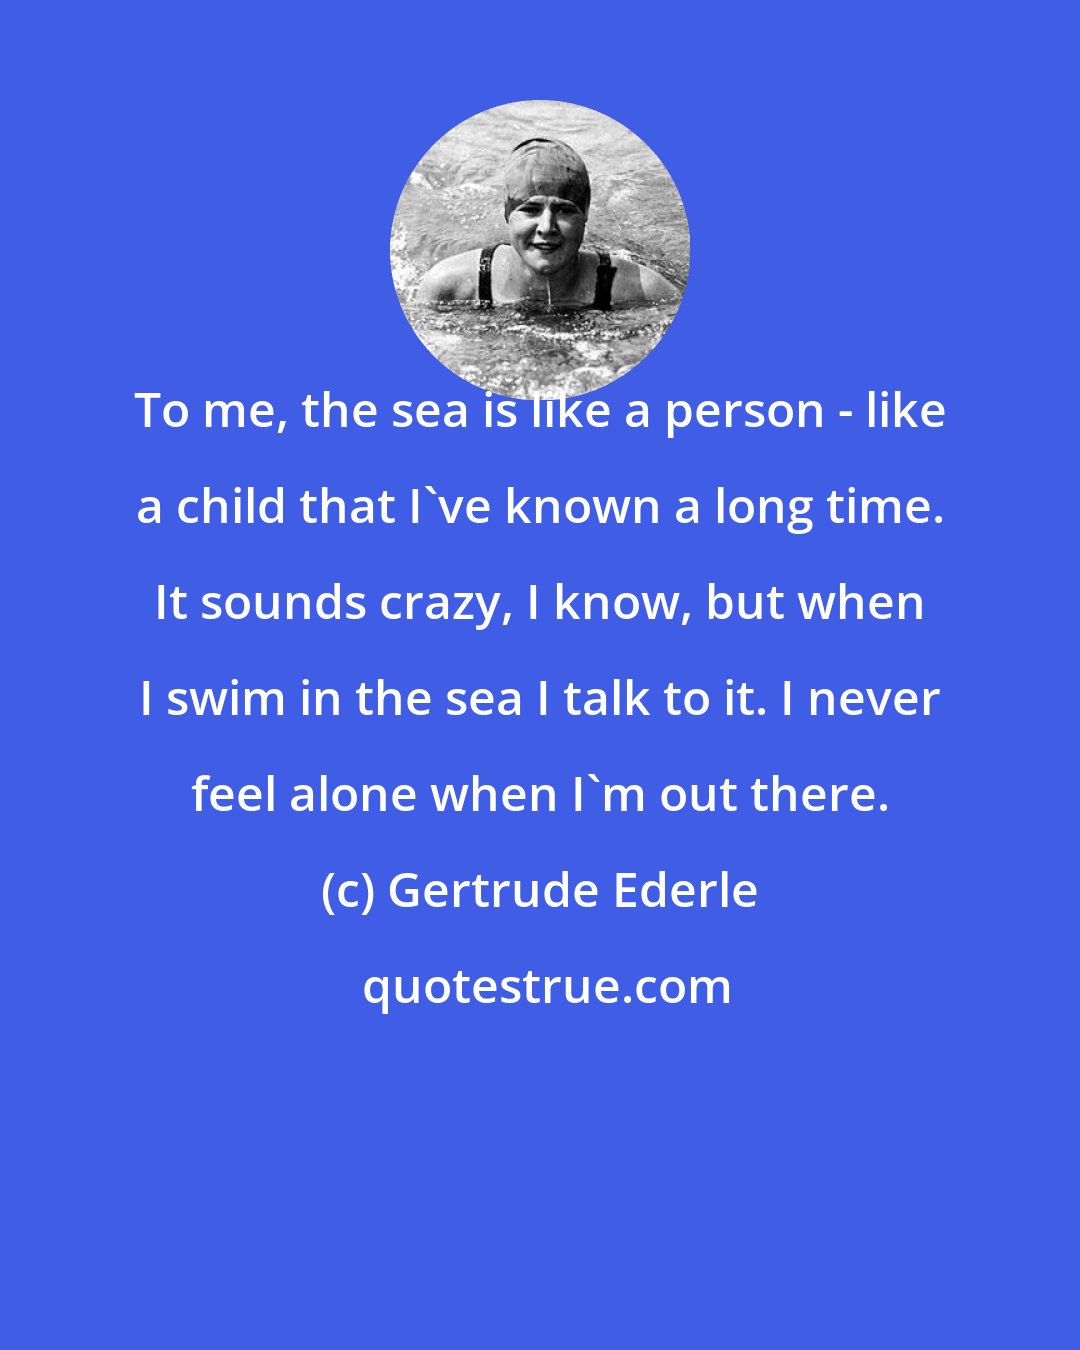 Gertrude Ederle: To me, the sea is like a person - like a child that I've known a long time. It sounds crazy, I know, but when I swim in the sea I talk to it. I never feel alone when I'm out there.